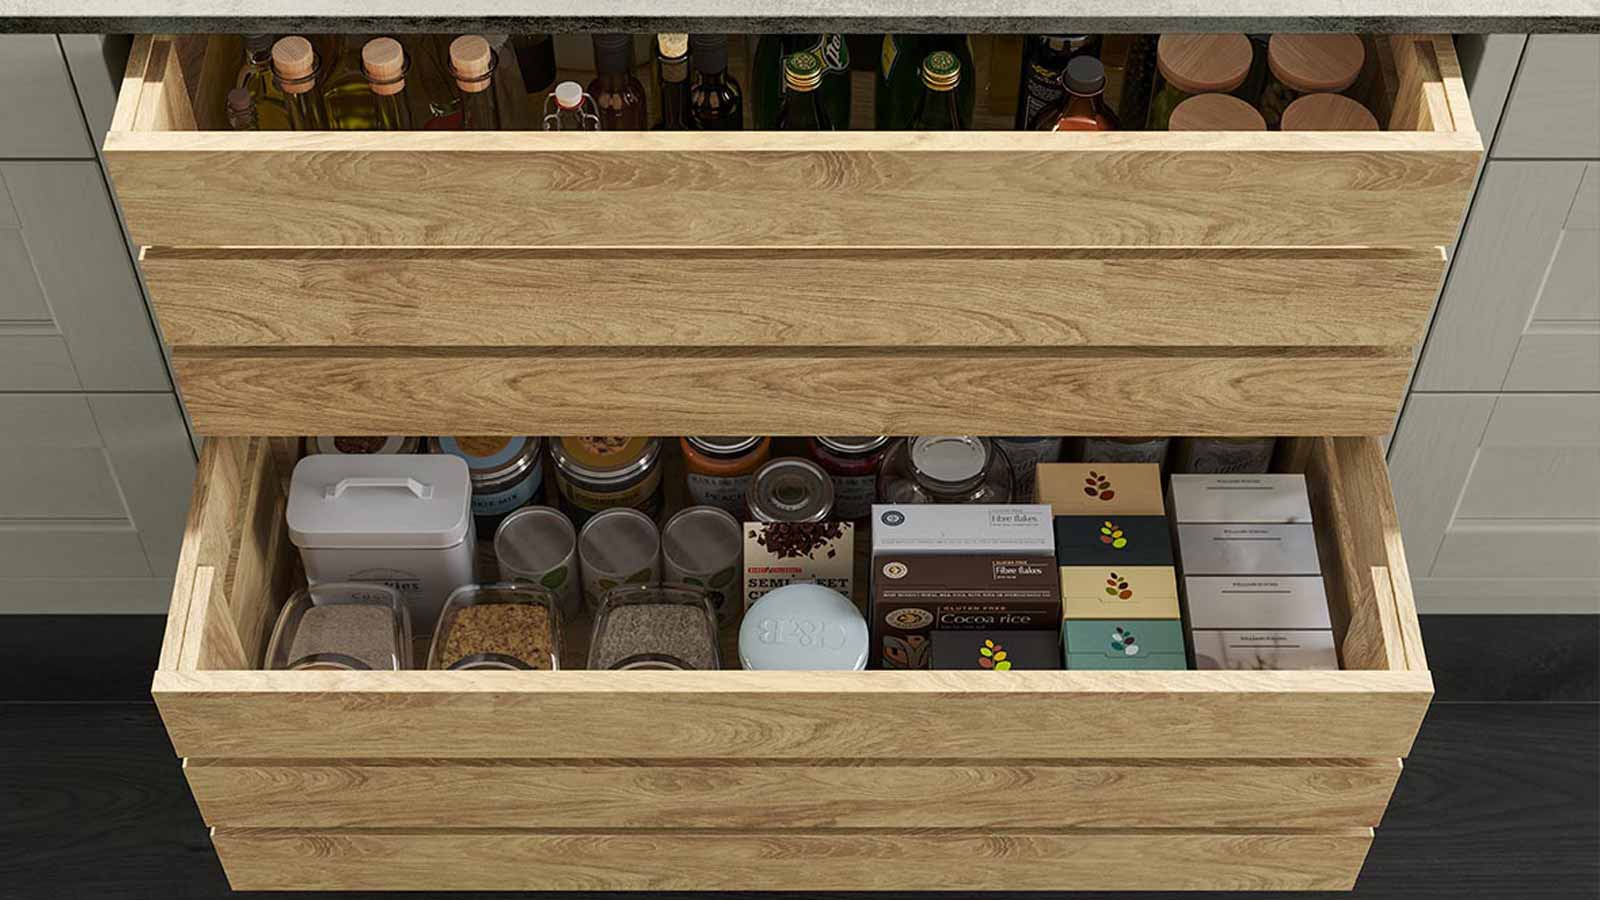 Light wood timbre crate drawers with a grained finish filled with pantry supplies